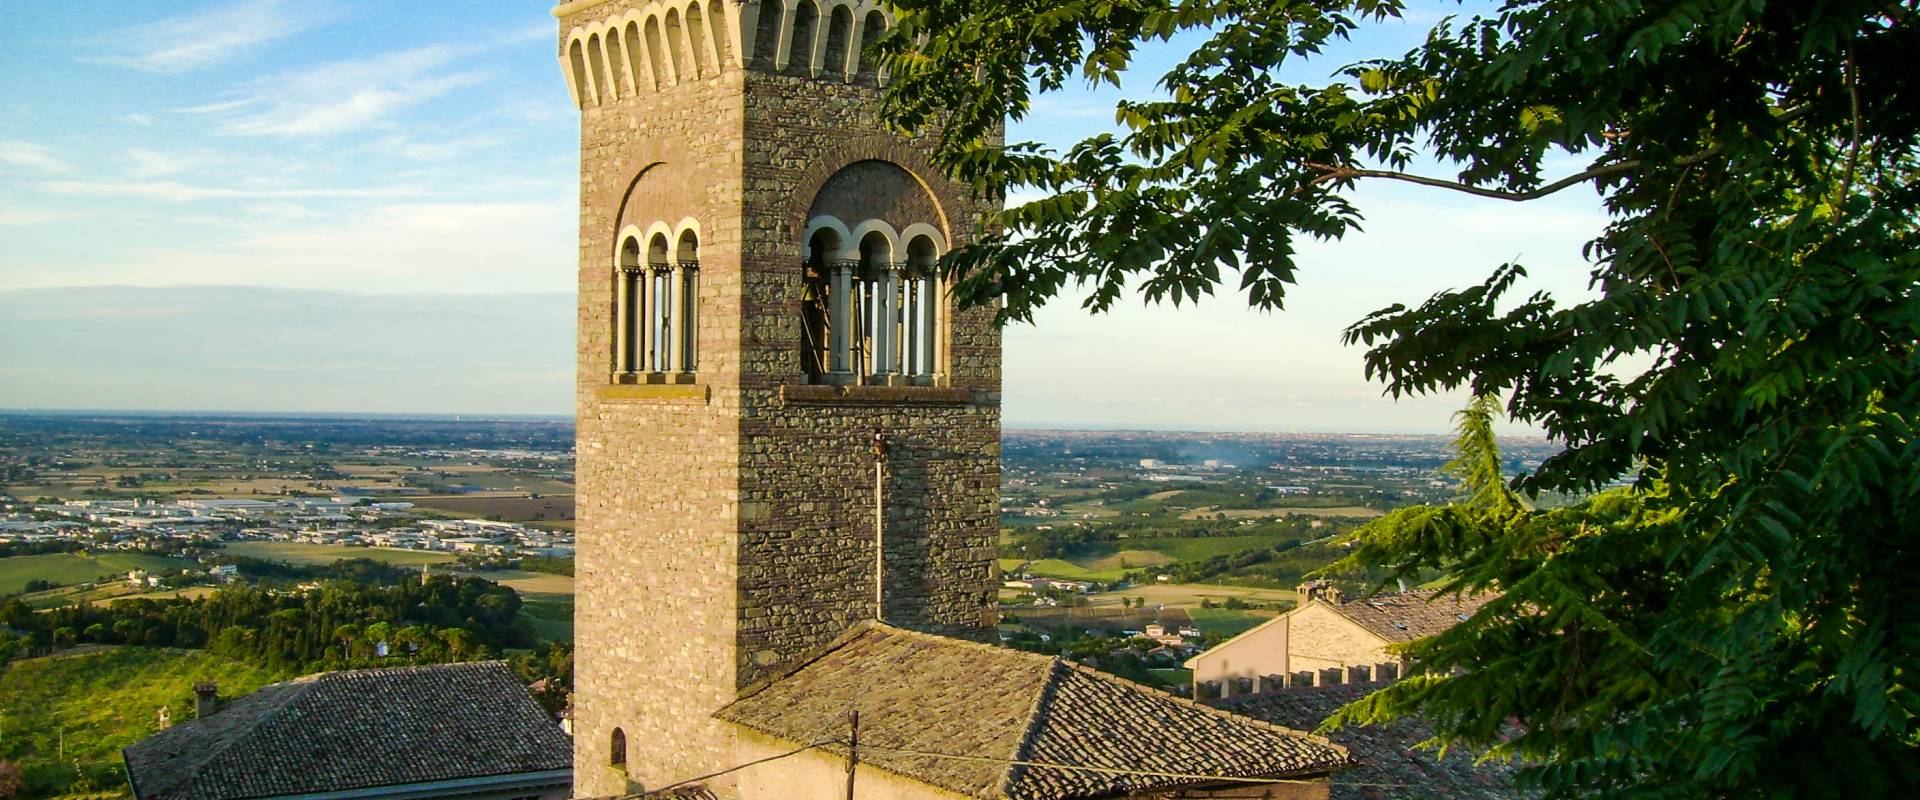 Torre Palazzo Comunale - Bertinoro photo by Anneaux